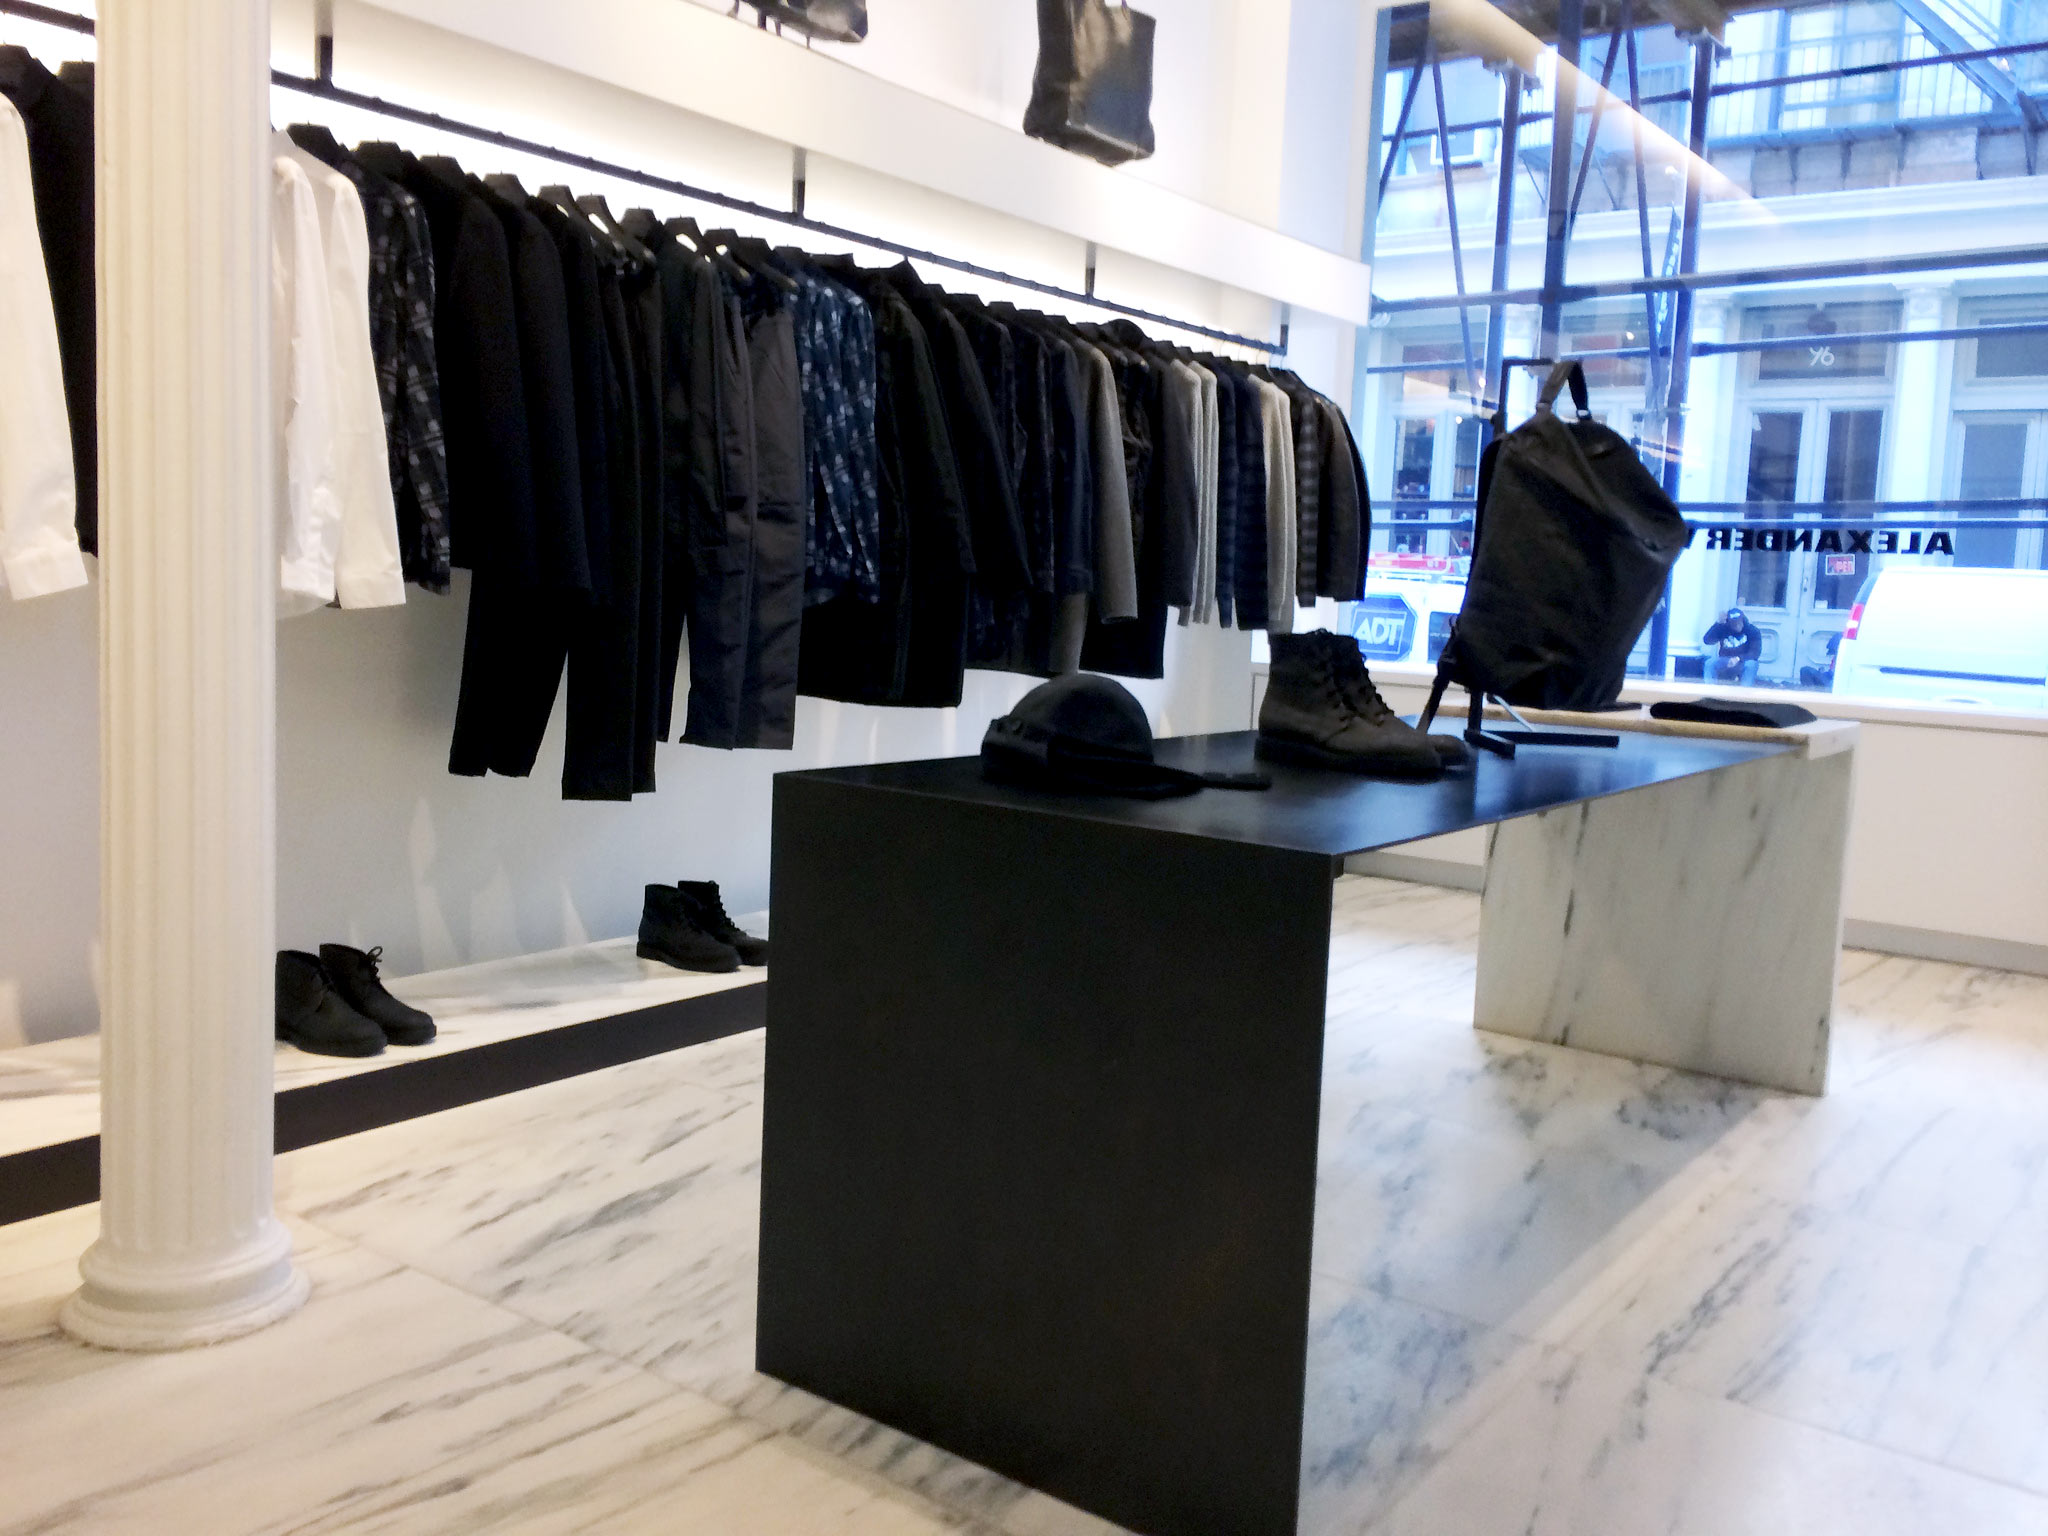 Modern fashion display at Alexander Wang in New York. Photo by alphacityguides.